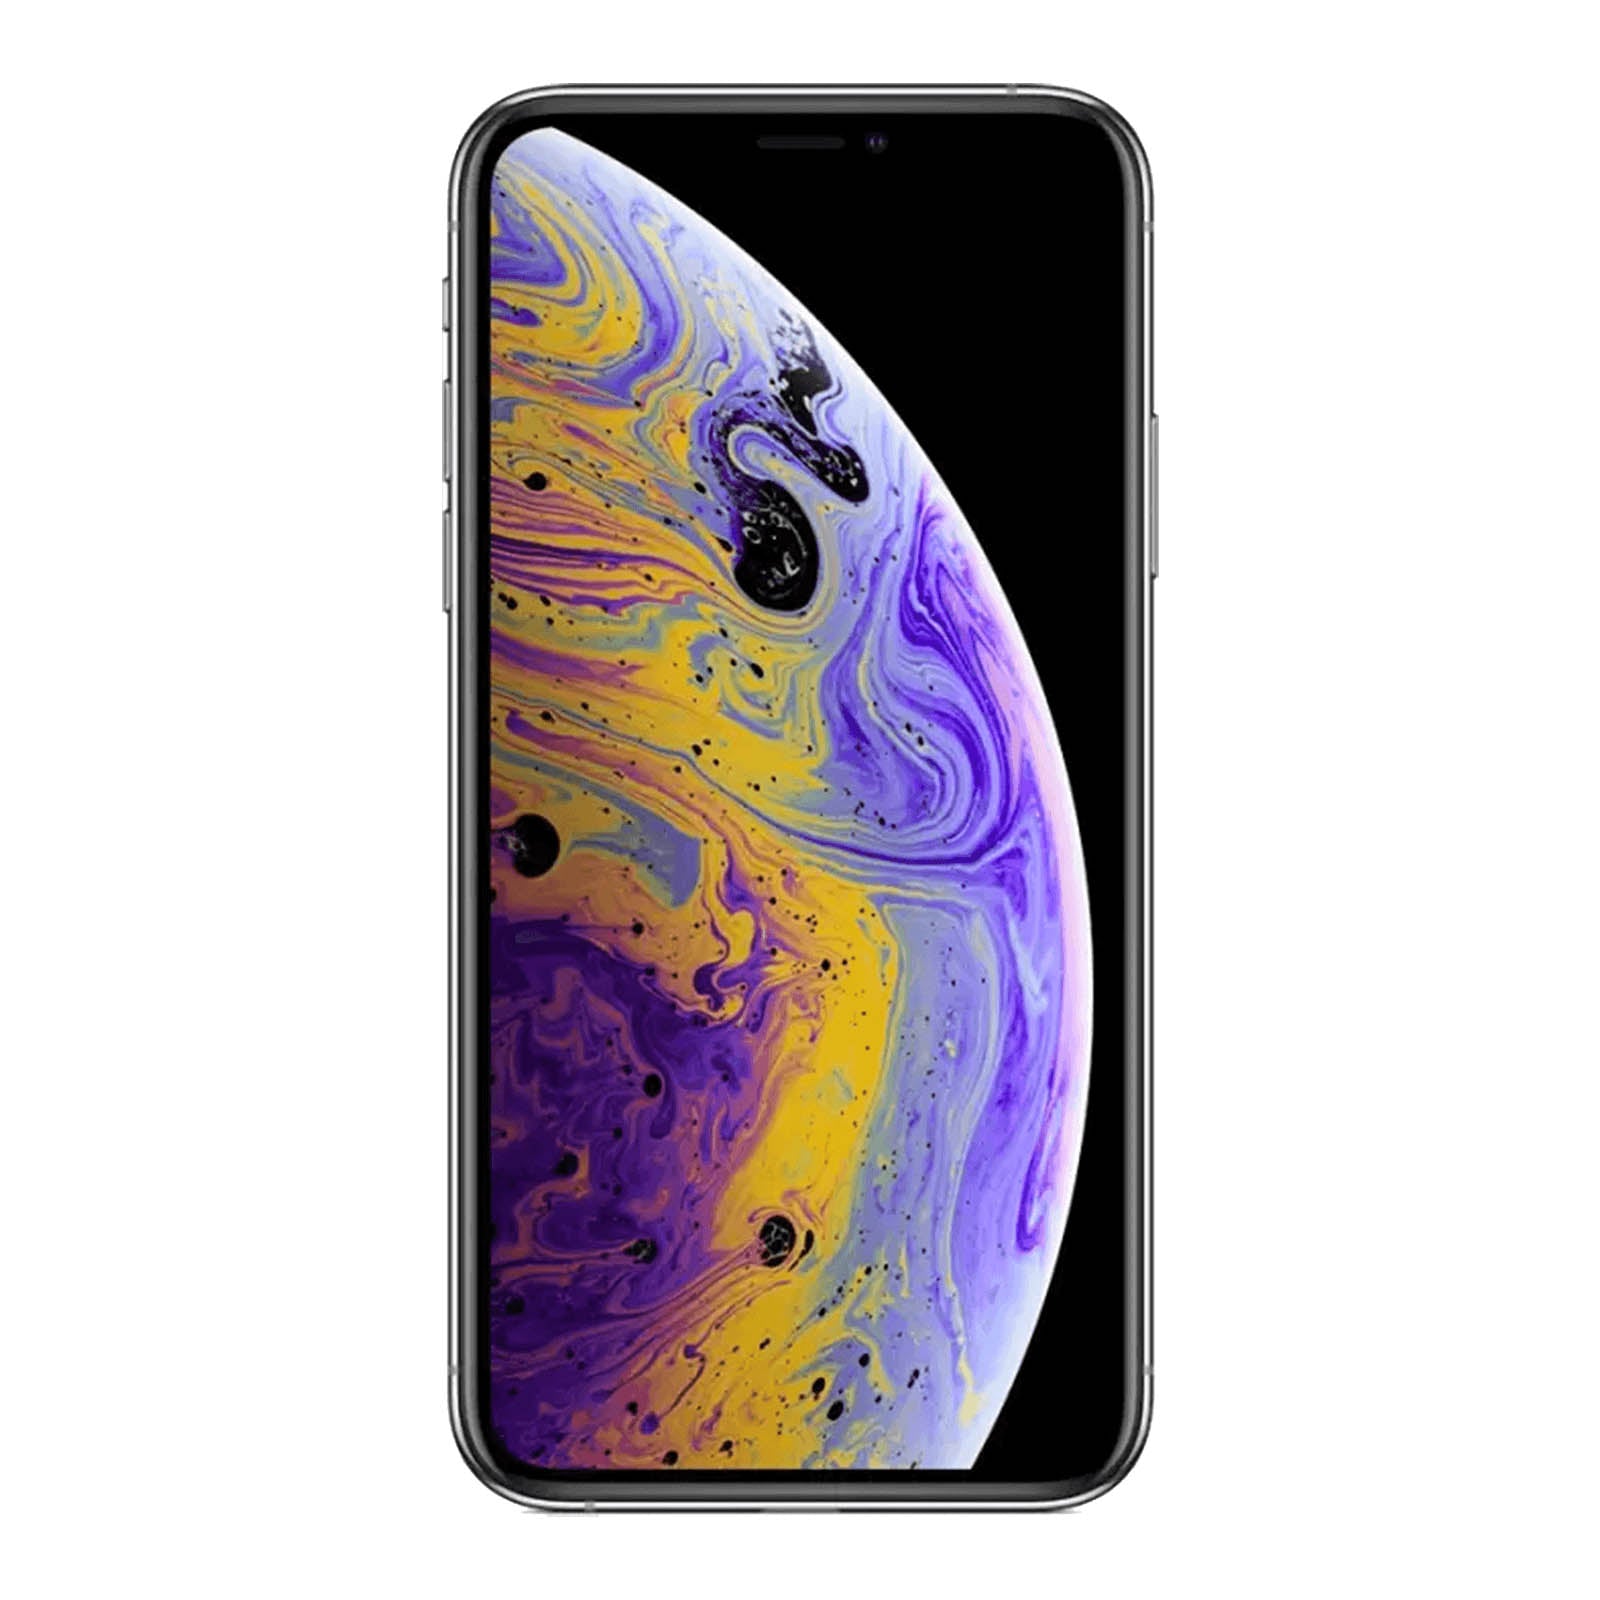 Apple iPhone XS Max 64GB Silver Very Good - T-Mobile